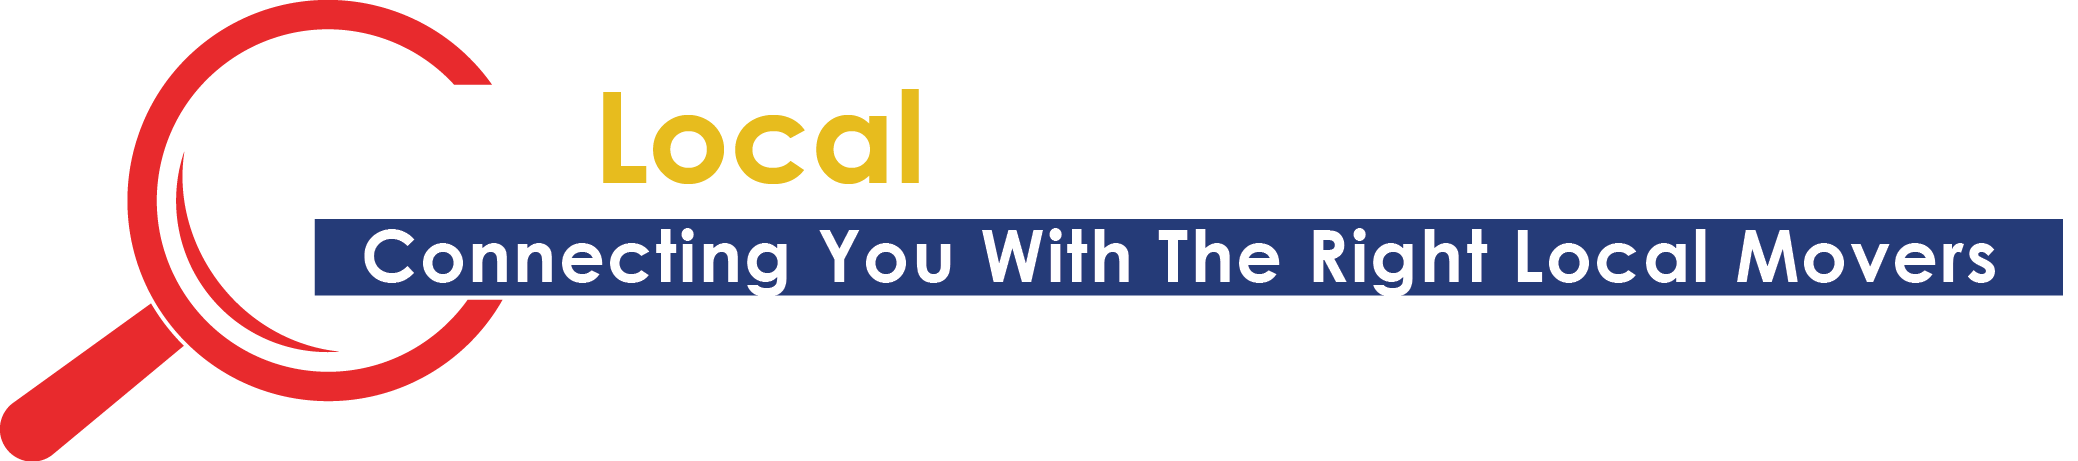 Find Local Moving Footer Logo